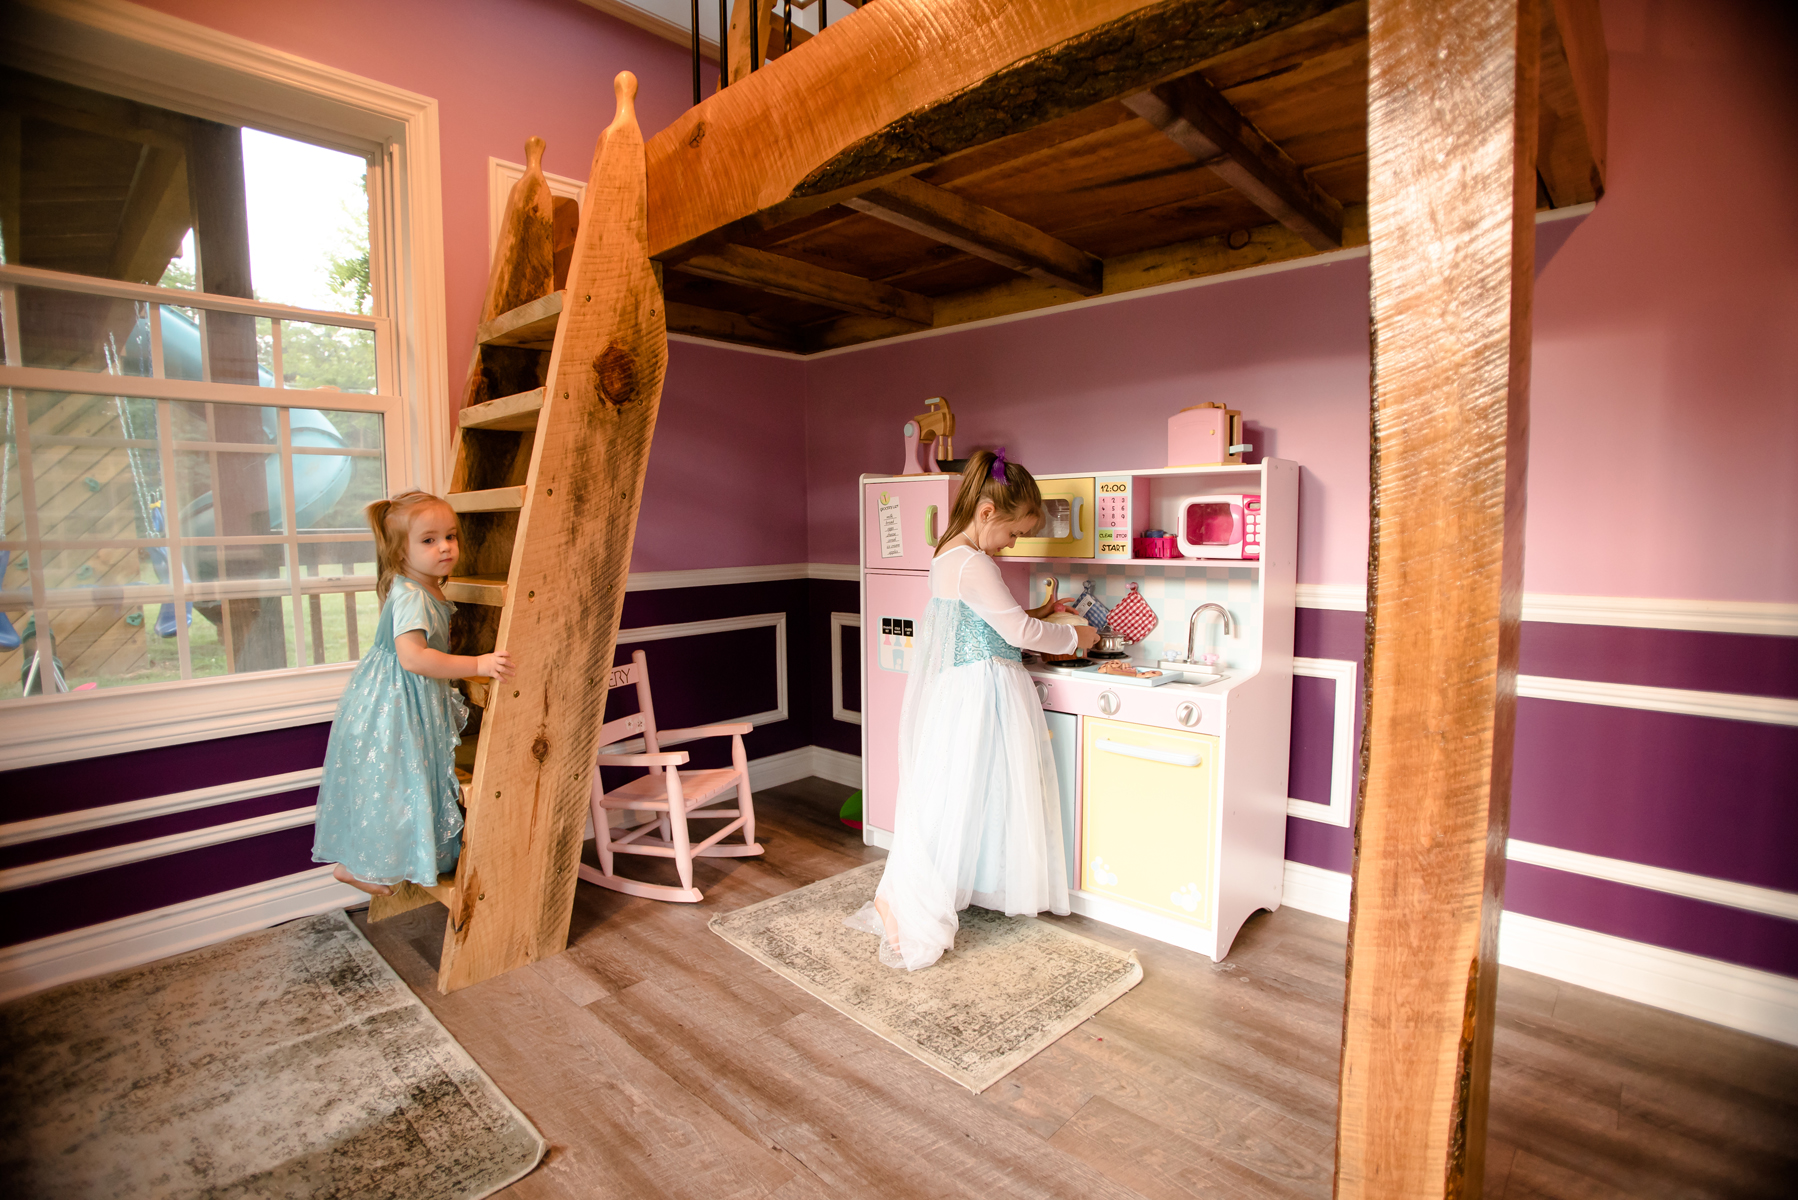 PHOTO: Michigan dad Adam Boyd built his daughters an amazing two-story playhouse with porches, a rock wall and 8-foot ceilings. 